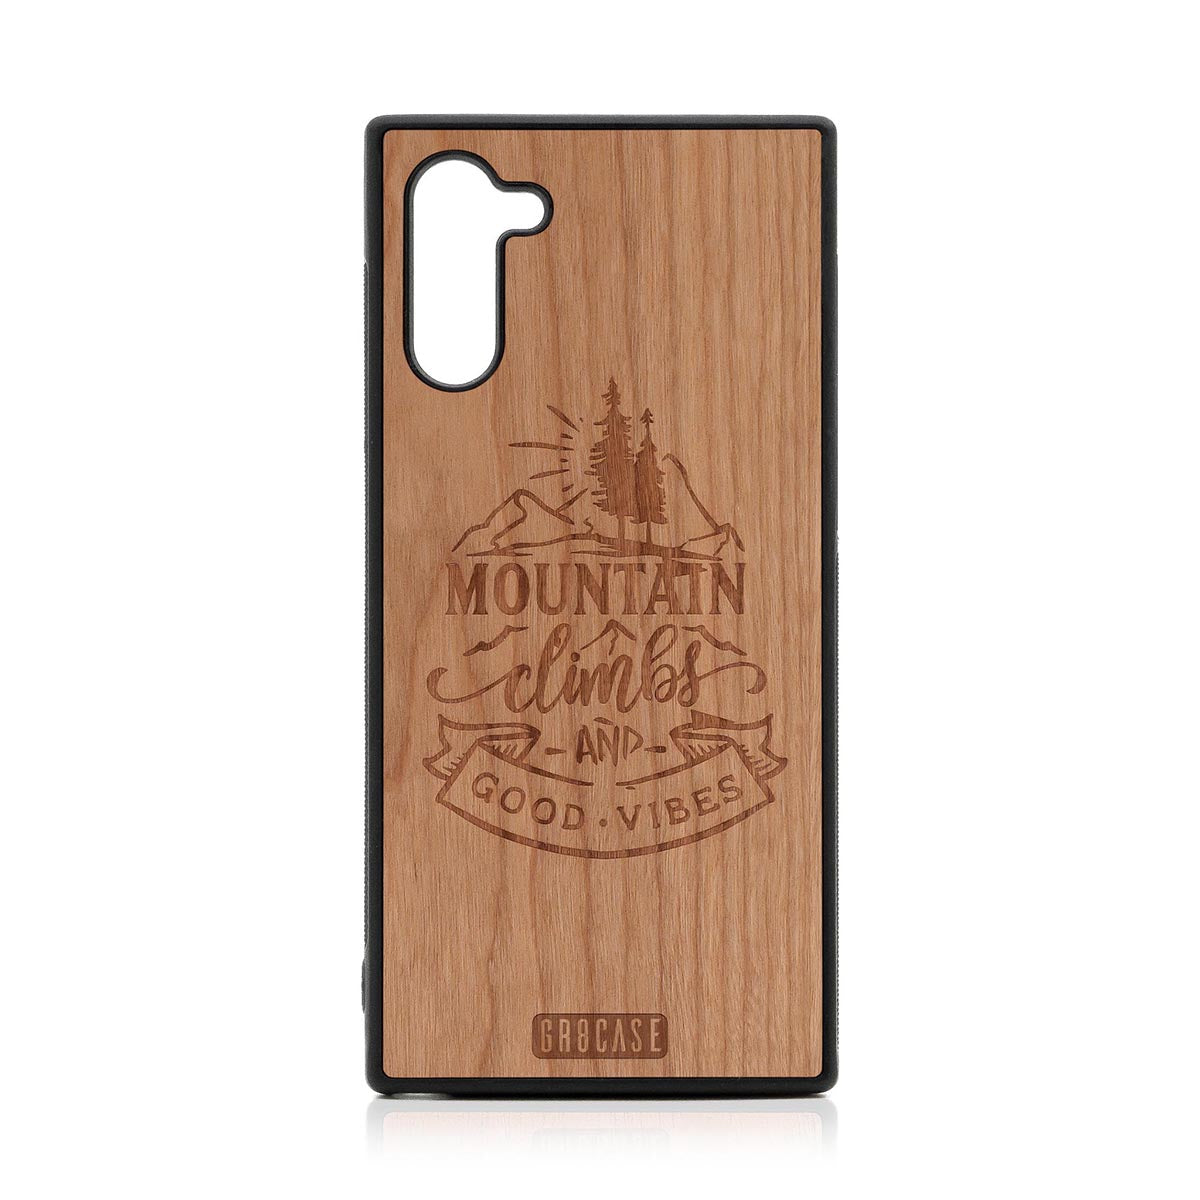 Mountain Climbs And Good Vibes Design Wood Case Samsung Galaxy Note 10 by GR8CASE